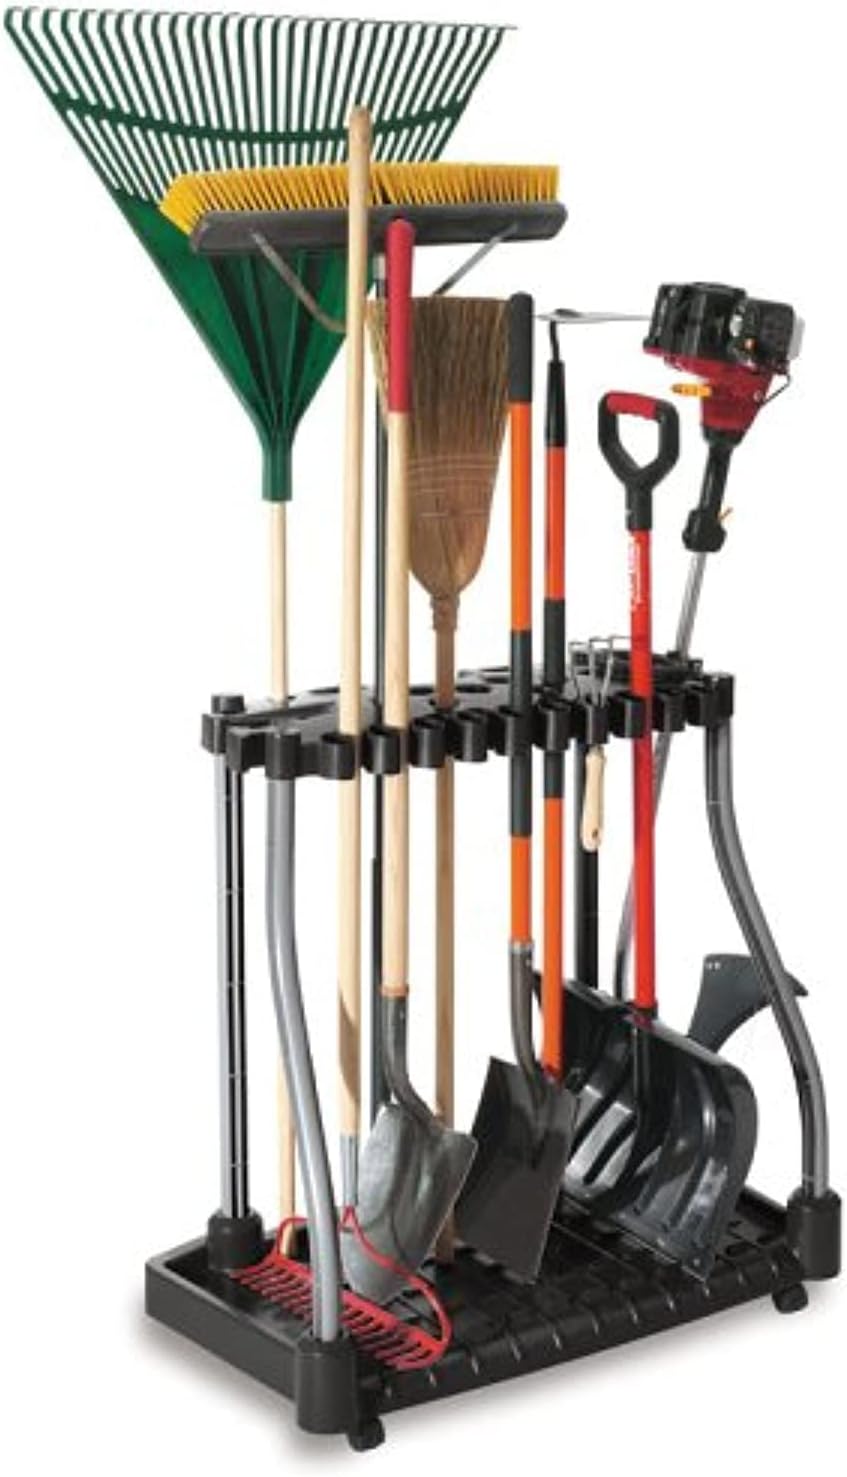 Rubbermaid Garage Tool Tower Rack, Easy to Assemble, Wheeled, Organizes up to 40 Long-Handled Tools/Rakes/ Brooms/Shovles in Home/House/Outdoor/Shed, Black